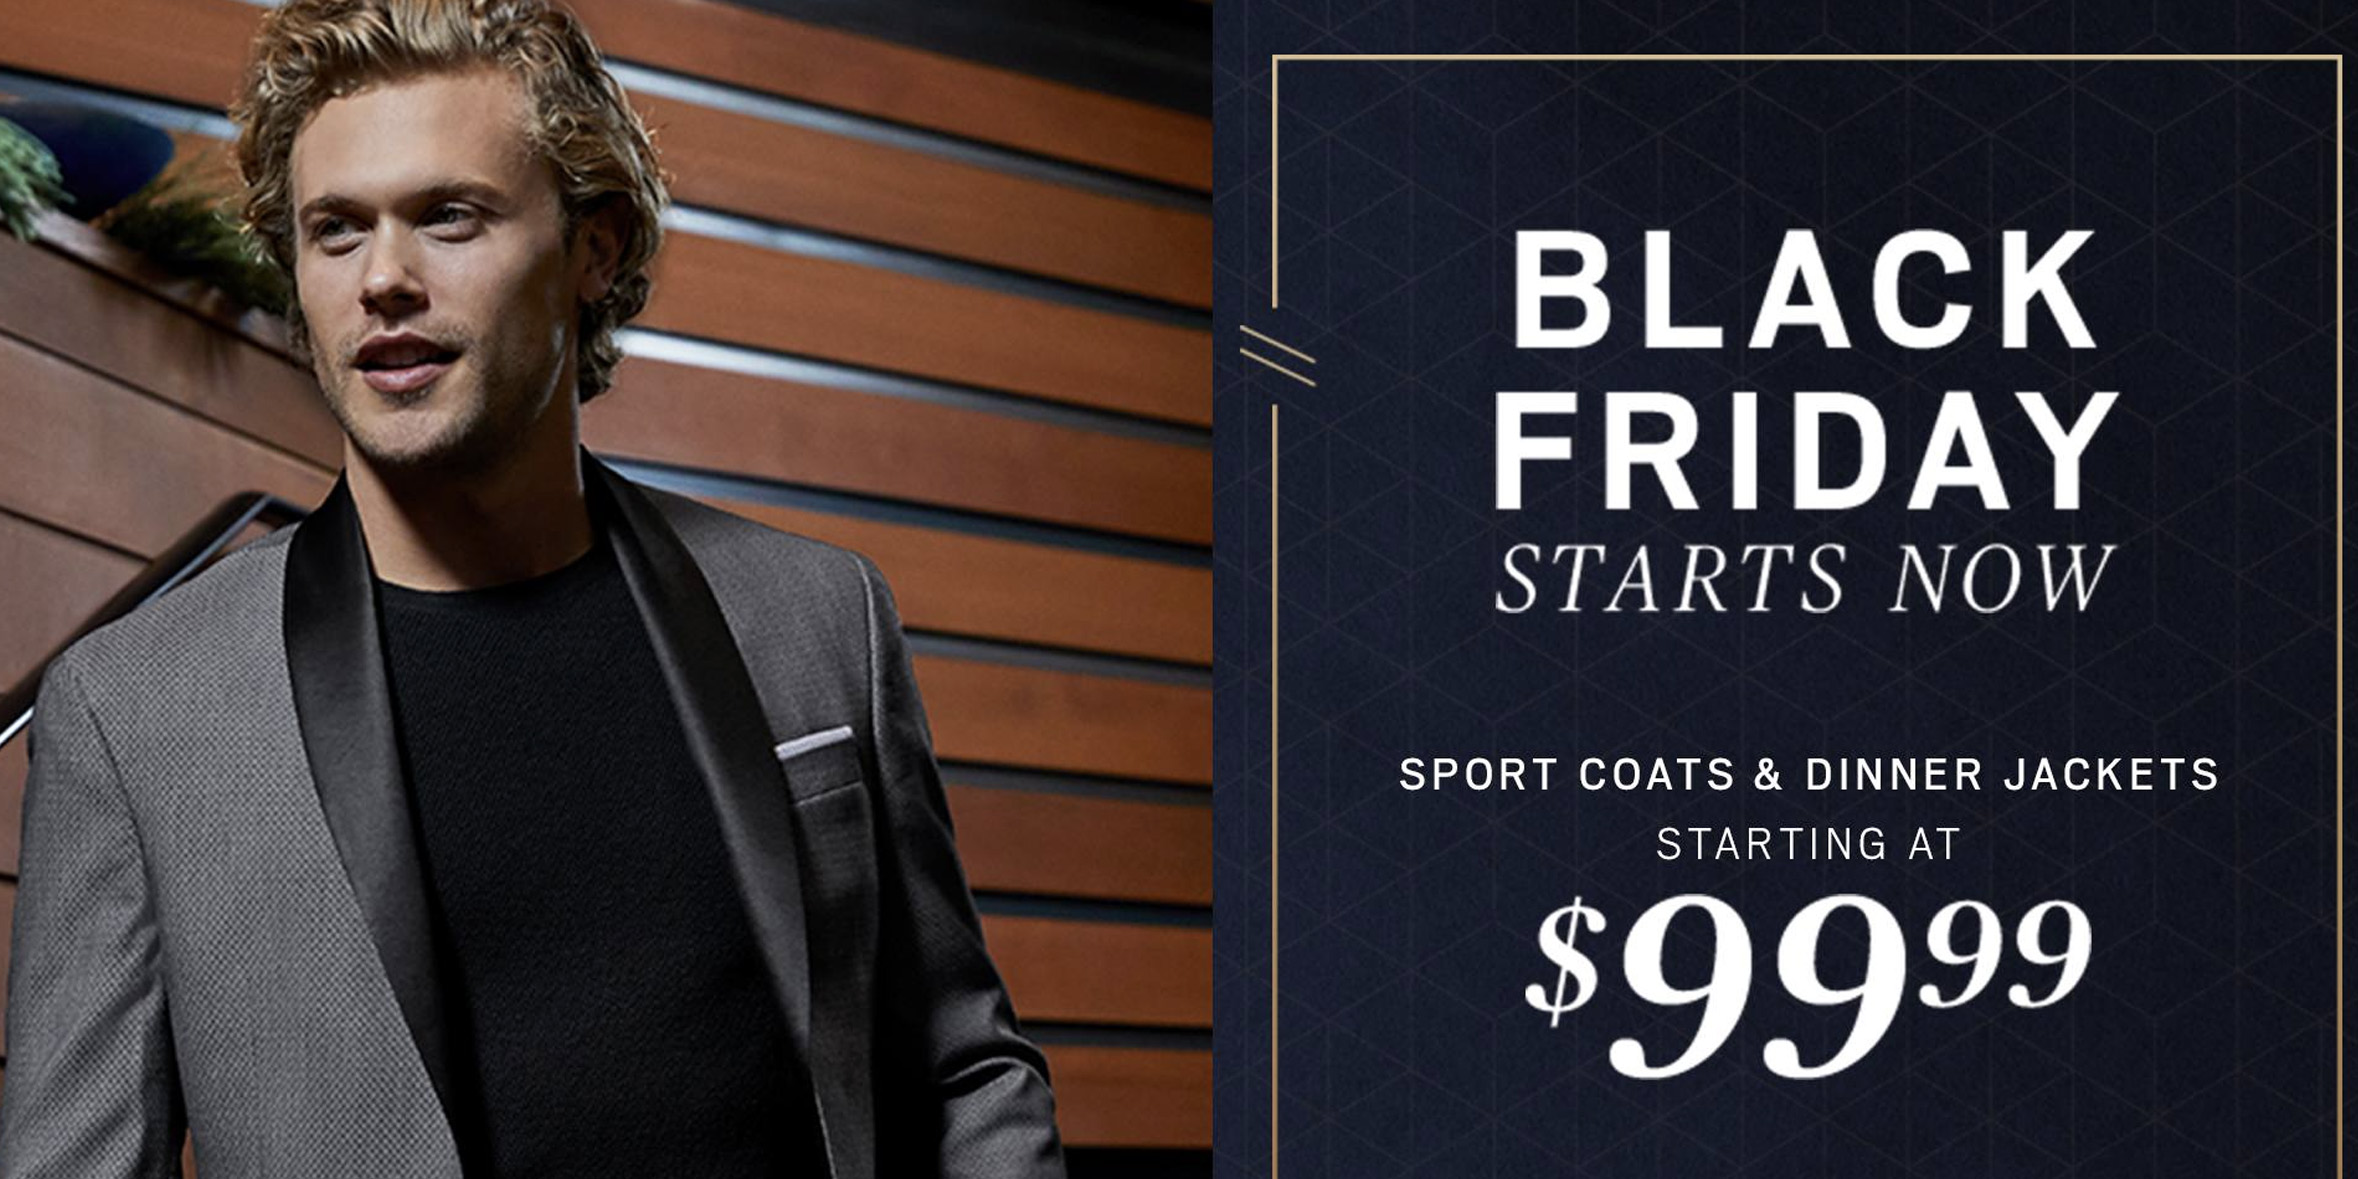 Men's Wearhouse Black Friday Deals are live! Save 30% off shoes, suits from  $150, more